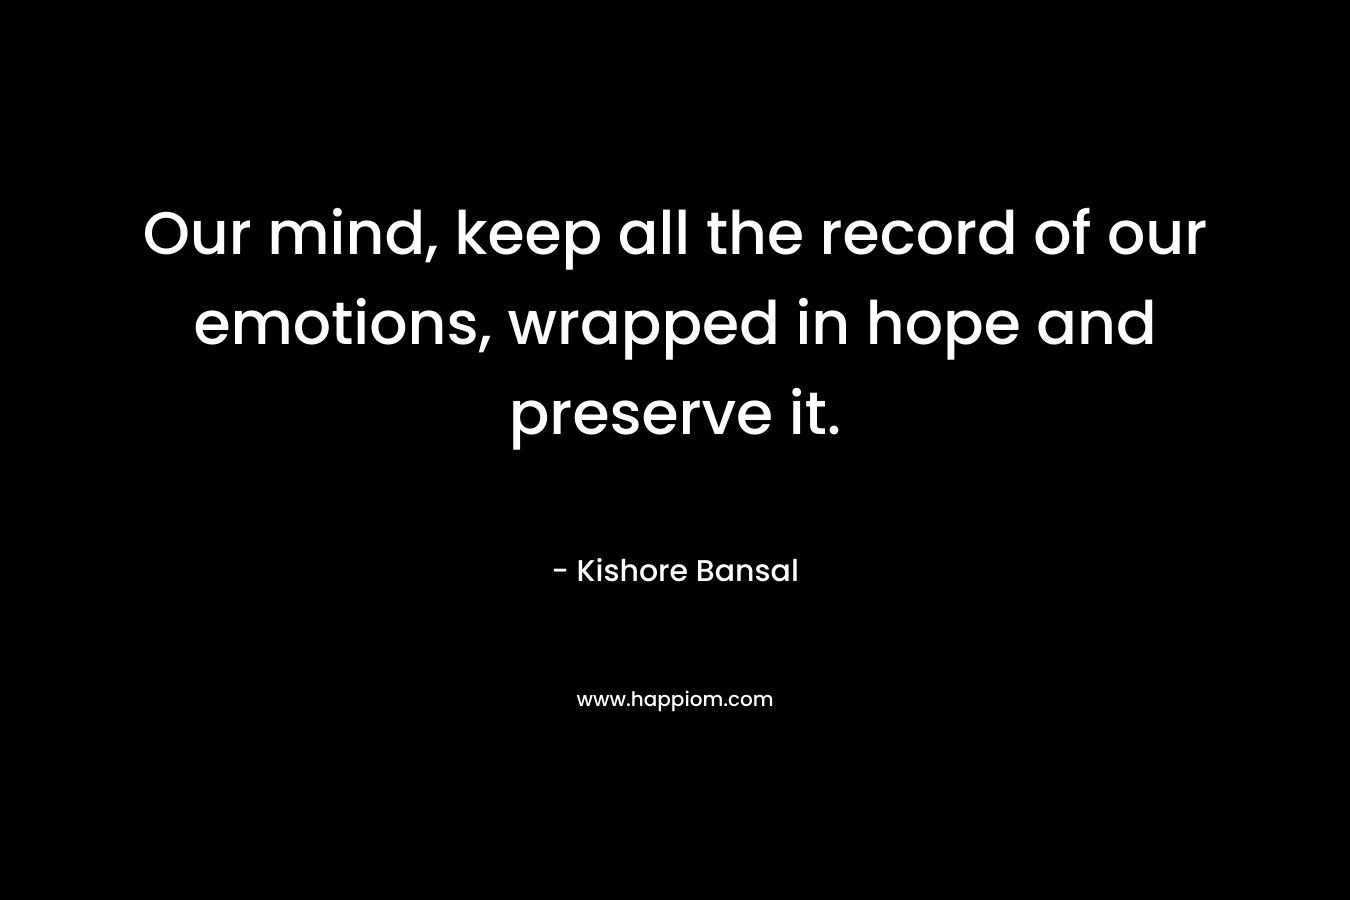 Our mind, keep all the record of our emotions, wrapped in hope and preserve it.